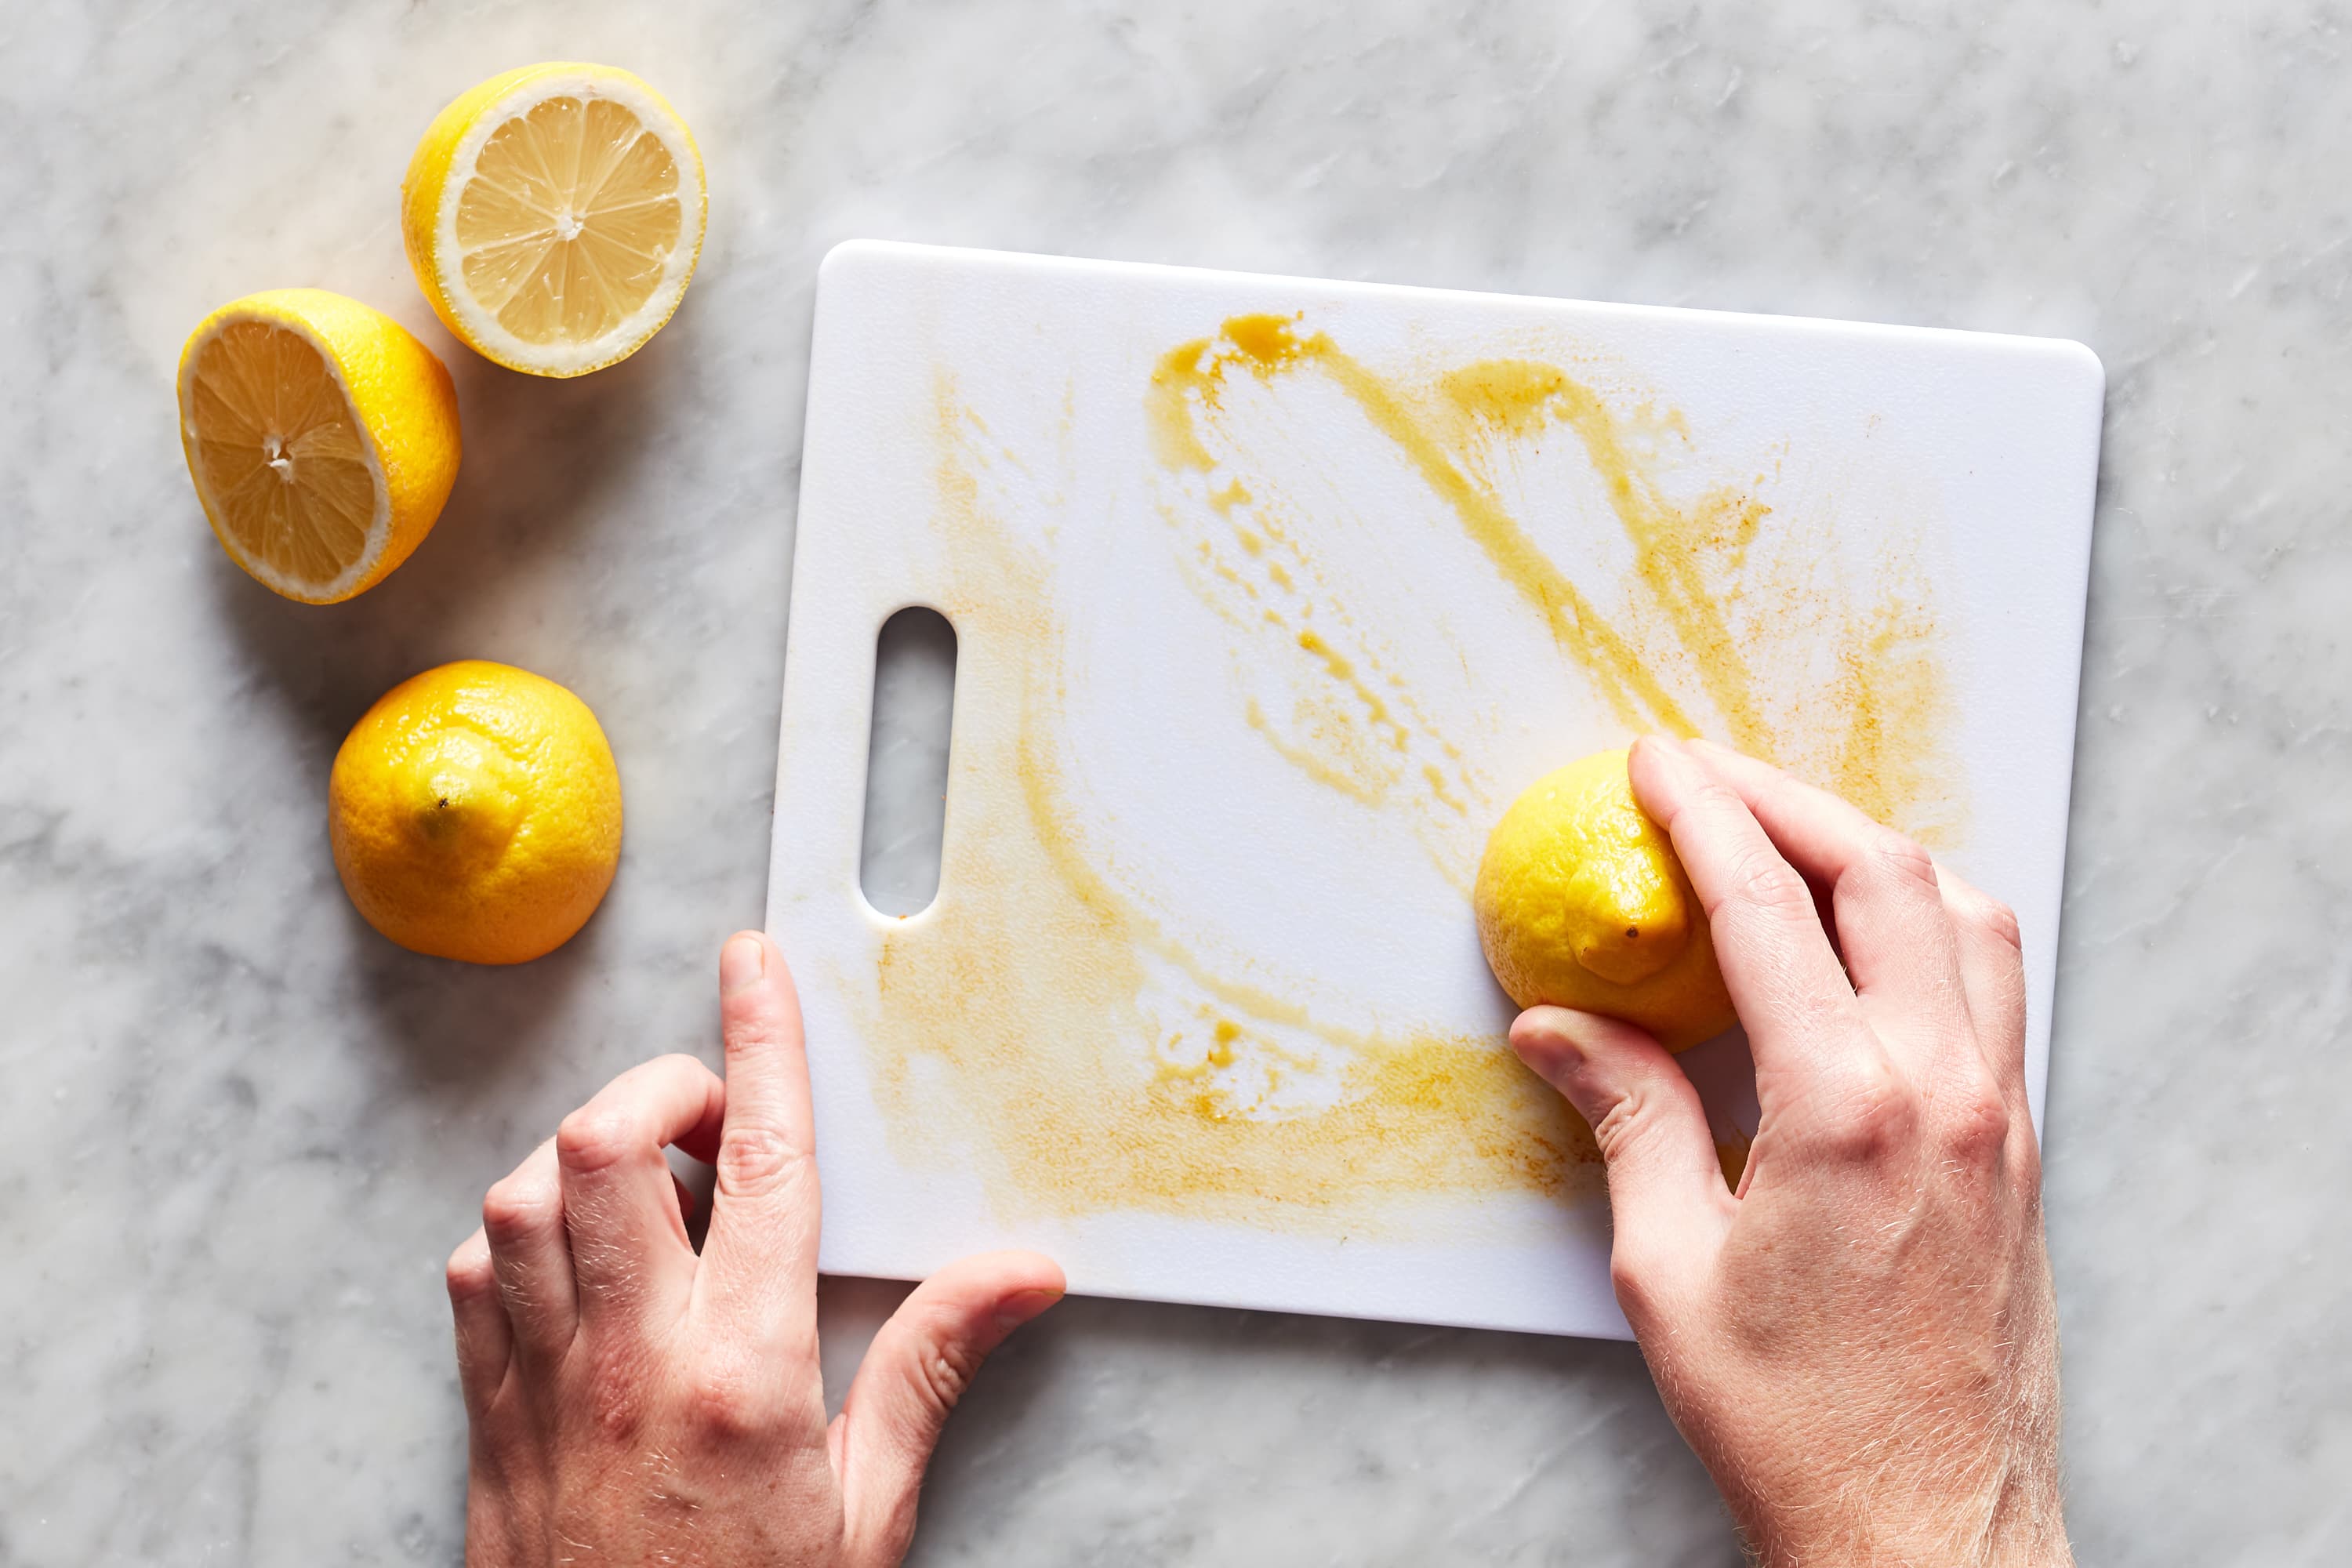 The Best Method for Cleaning Plastic Cutting Boards